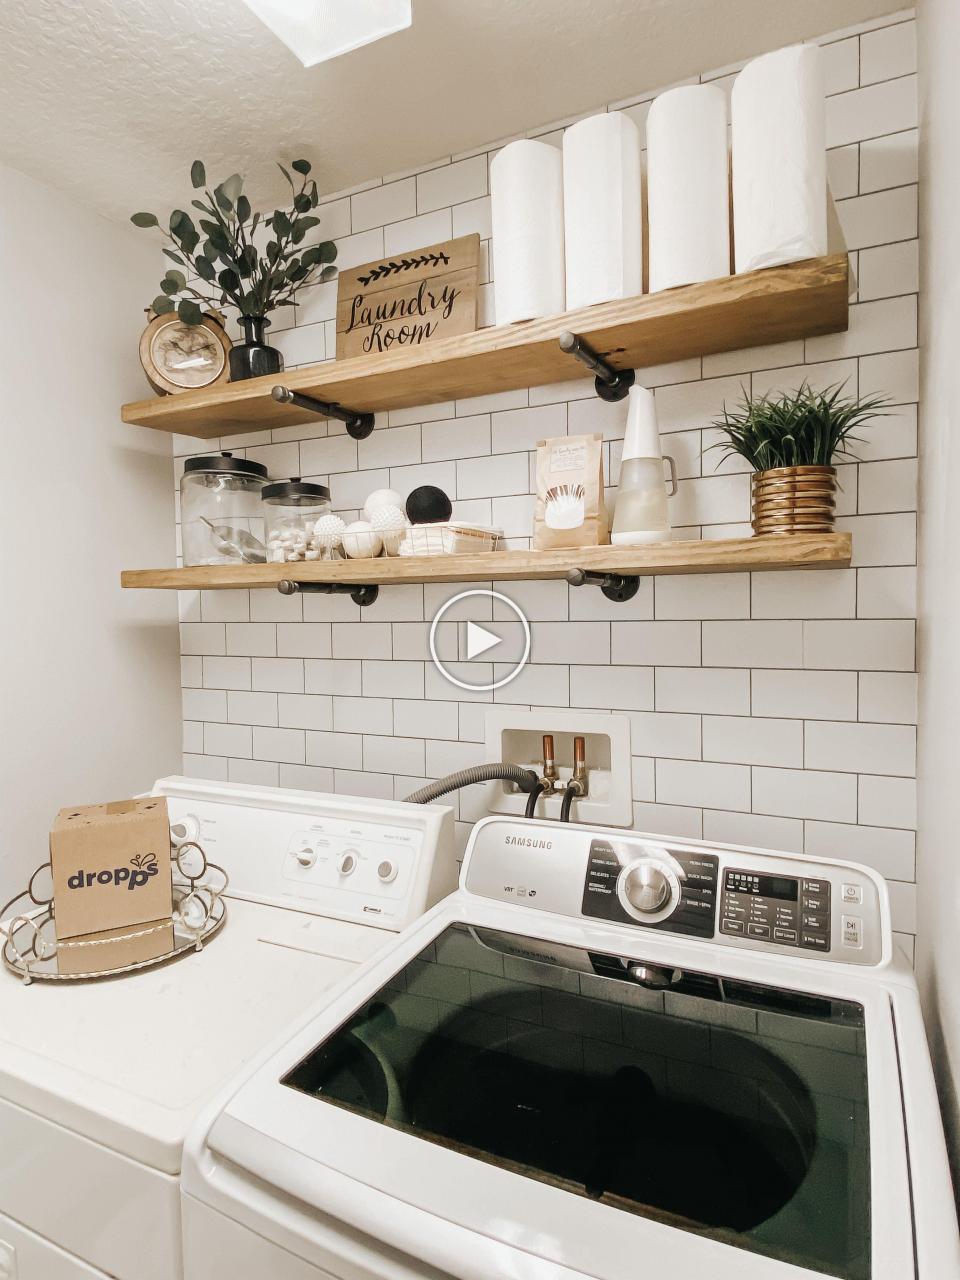 Small laundry room ideas on a budget. DIY open shelving and peel and